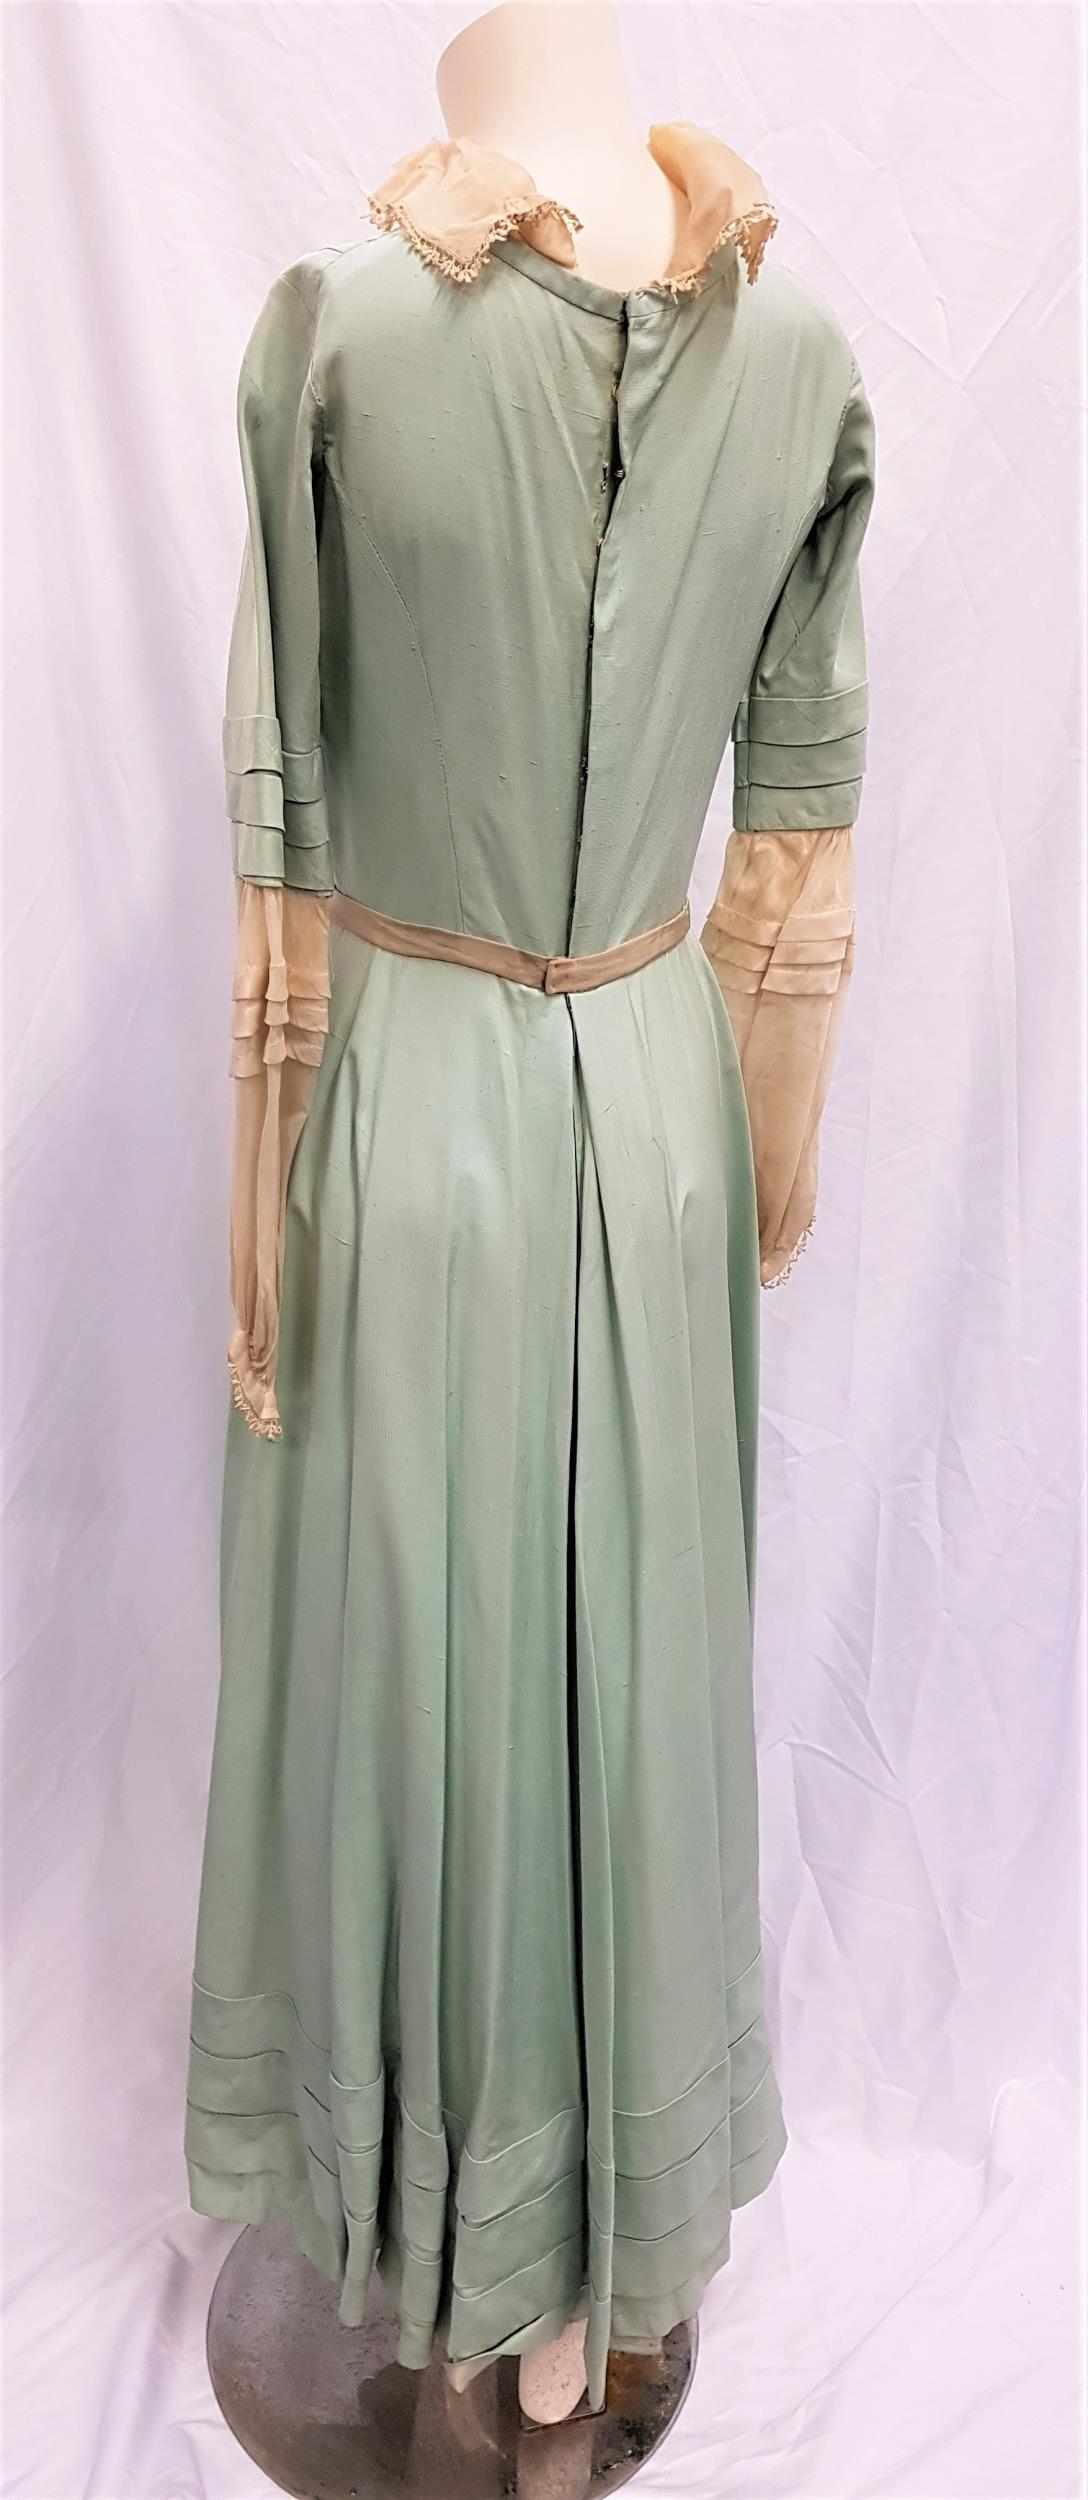 THE CRUCIBLE (1996) - HANDMADE PALE GREEN AND IVORY SILK DRESS Custom made by western costumes, - Image 2 of 4